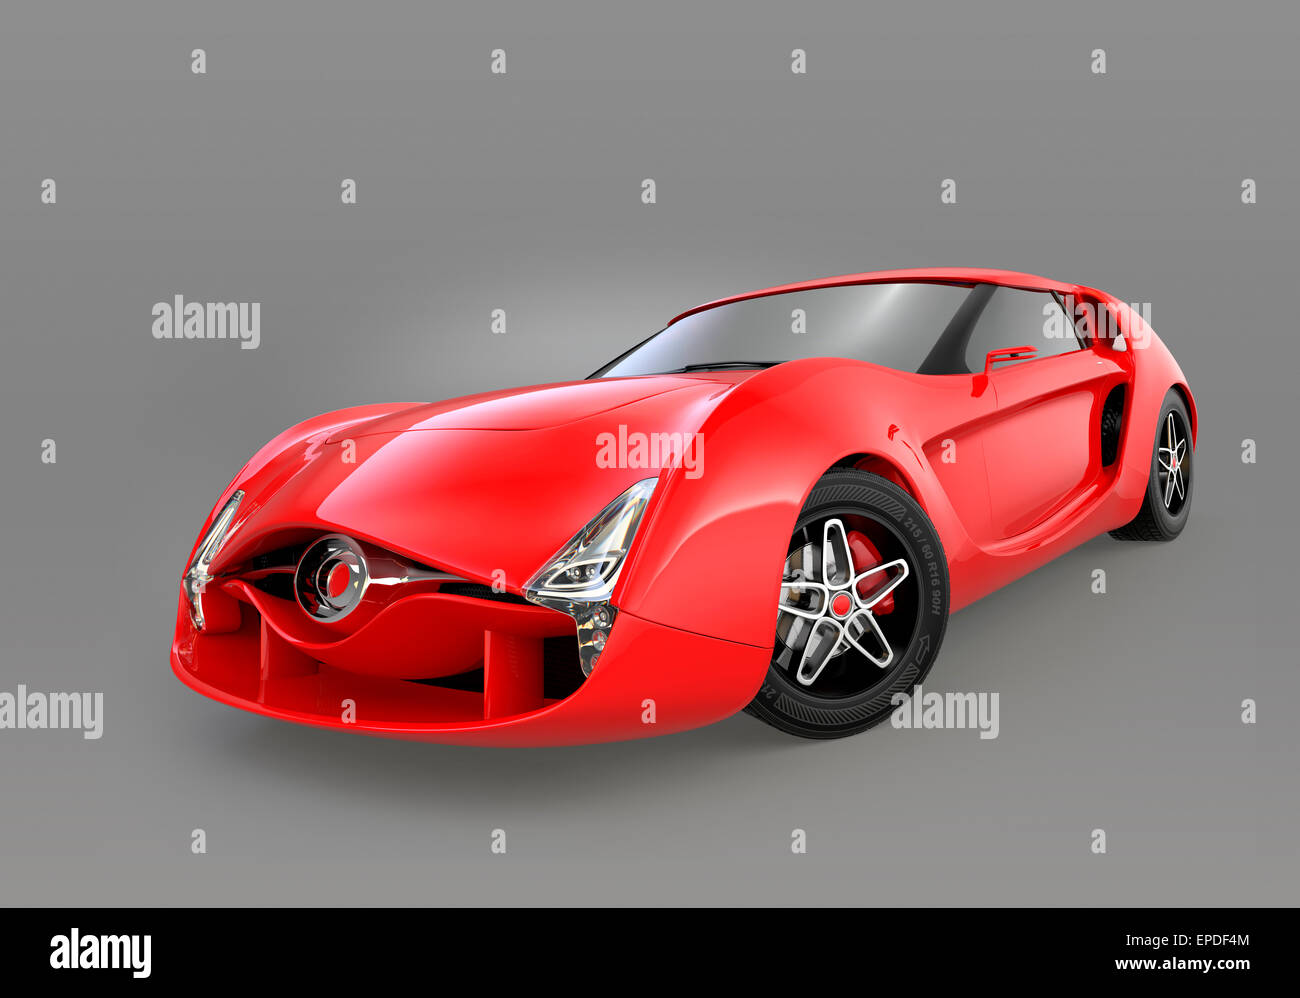 Red sports car isolated on gray background with clipping path. Original design. Stock Photo